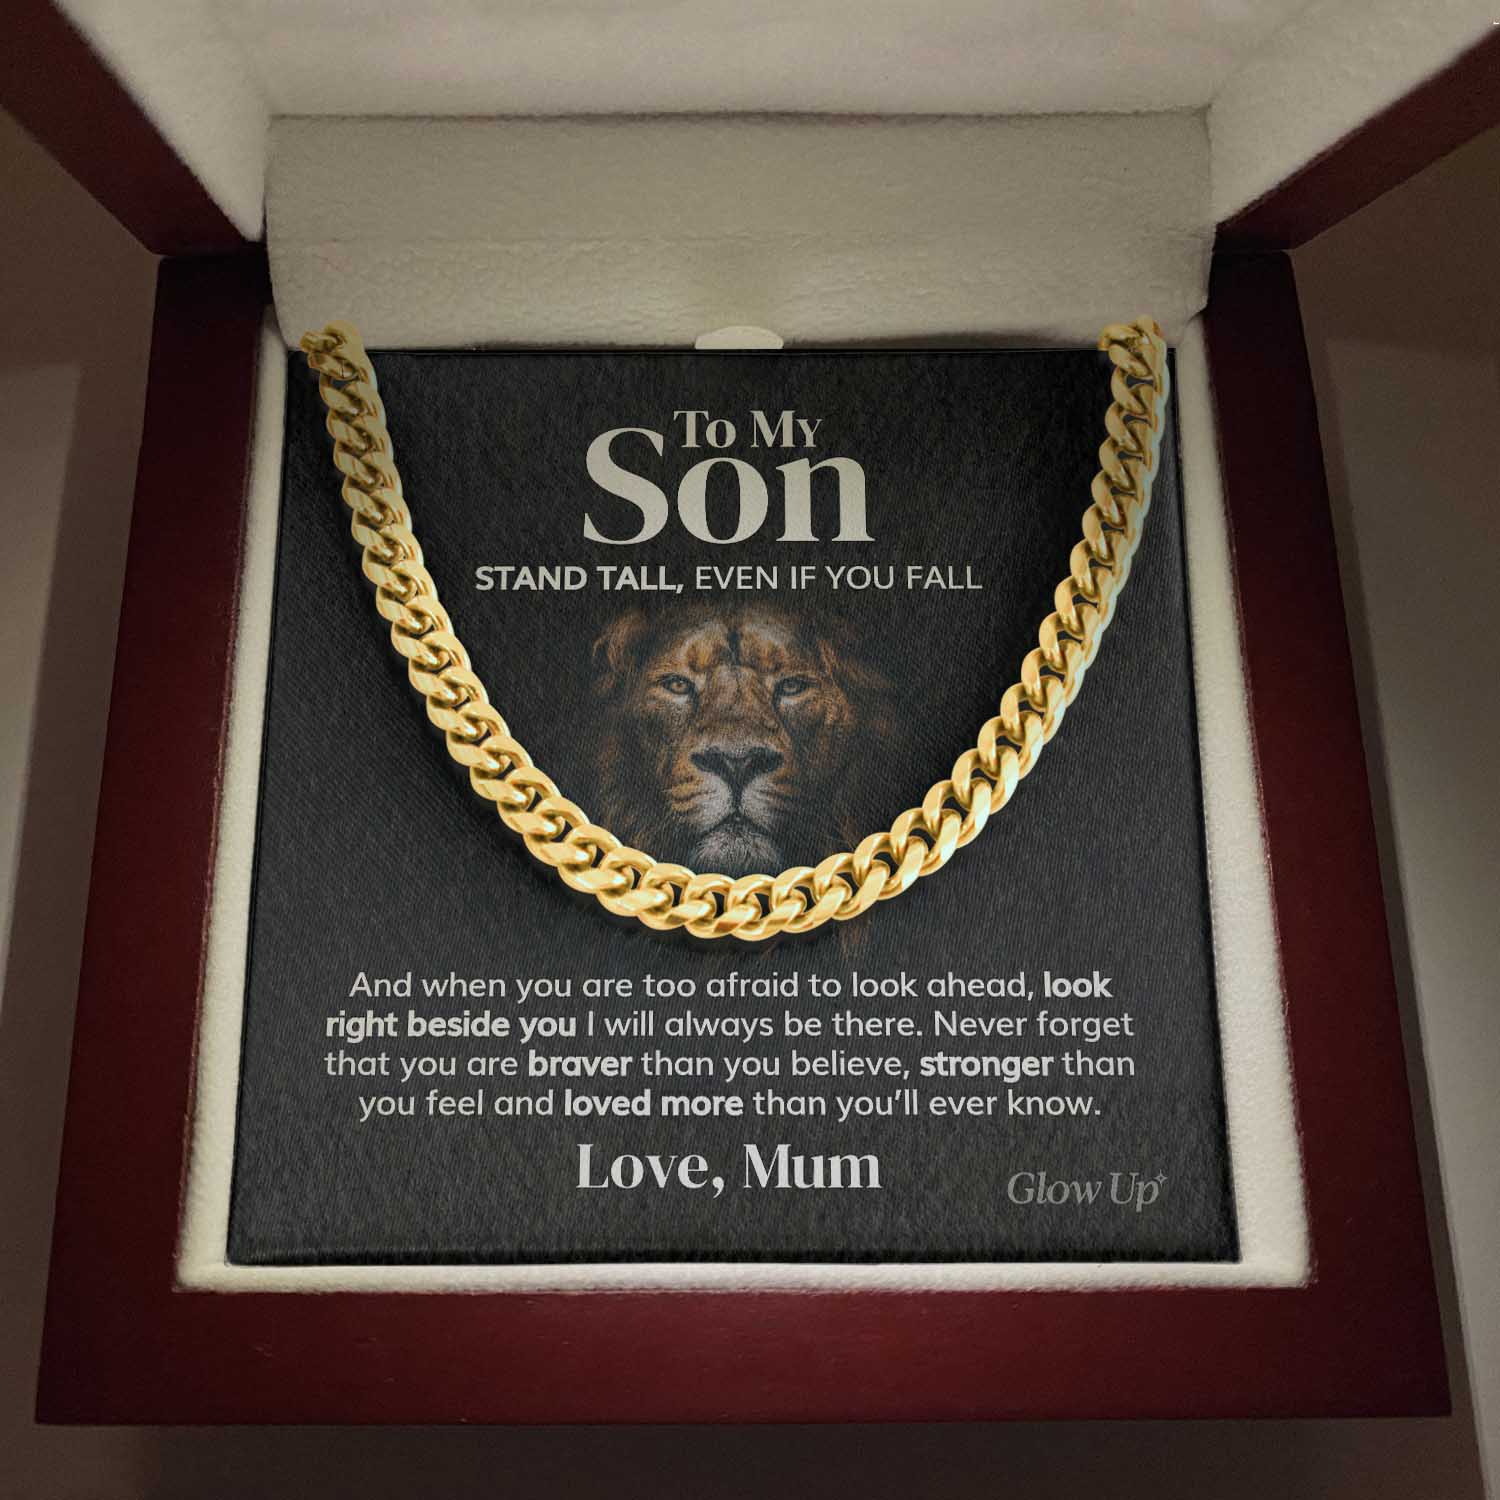 Glow Up Cuban Link Chain 18k Gold Over Stainless Steel / Luxury LED Box To my Son from Mum - Cuban Link Chain - Stand Tall